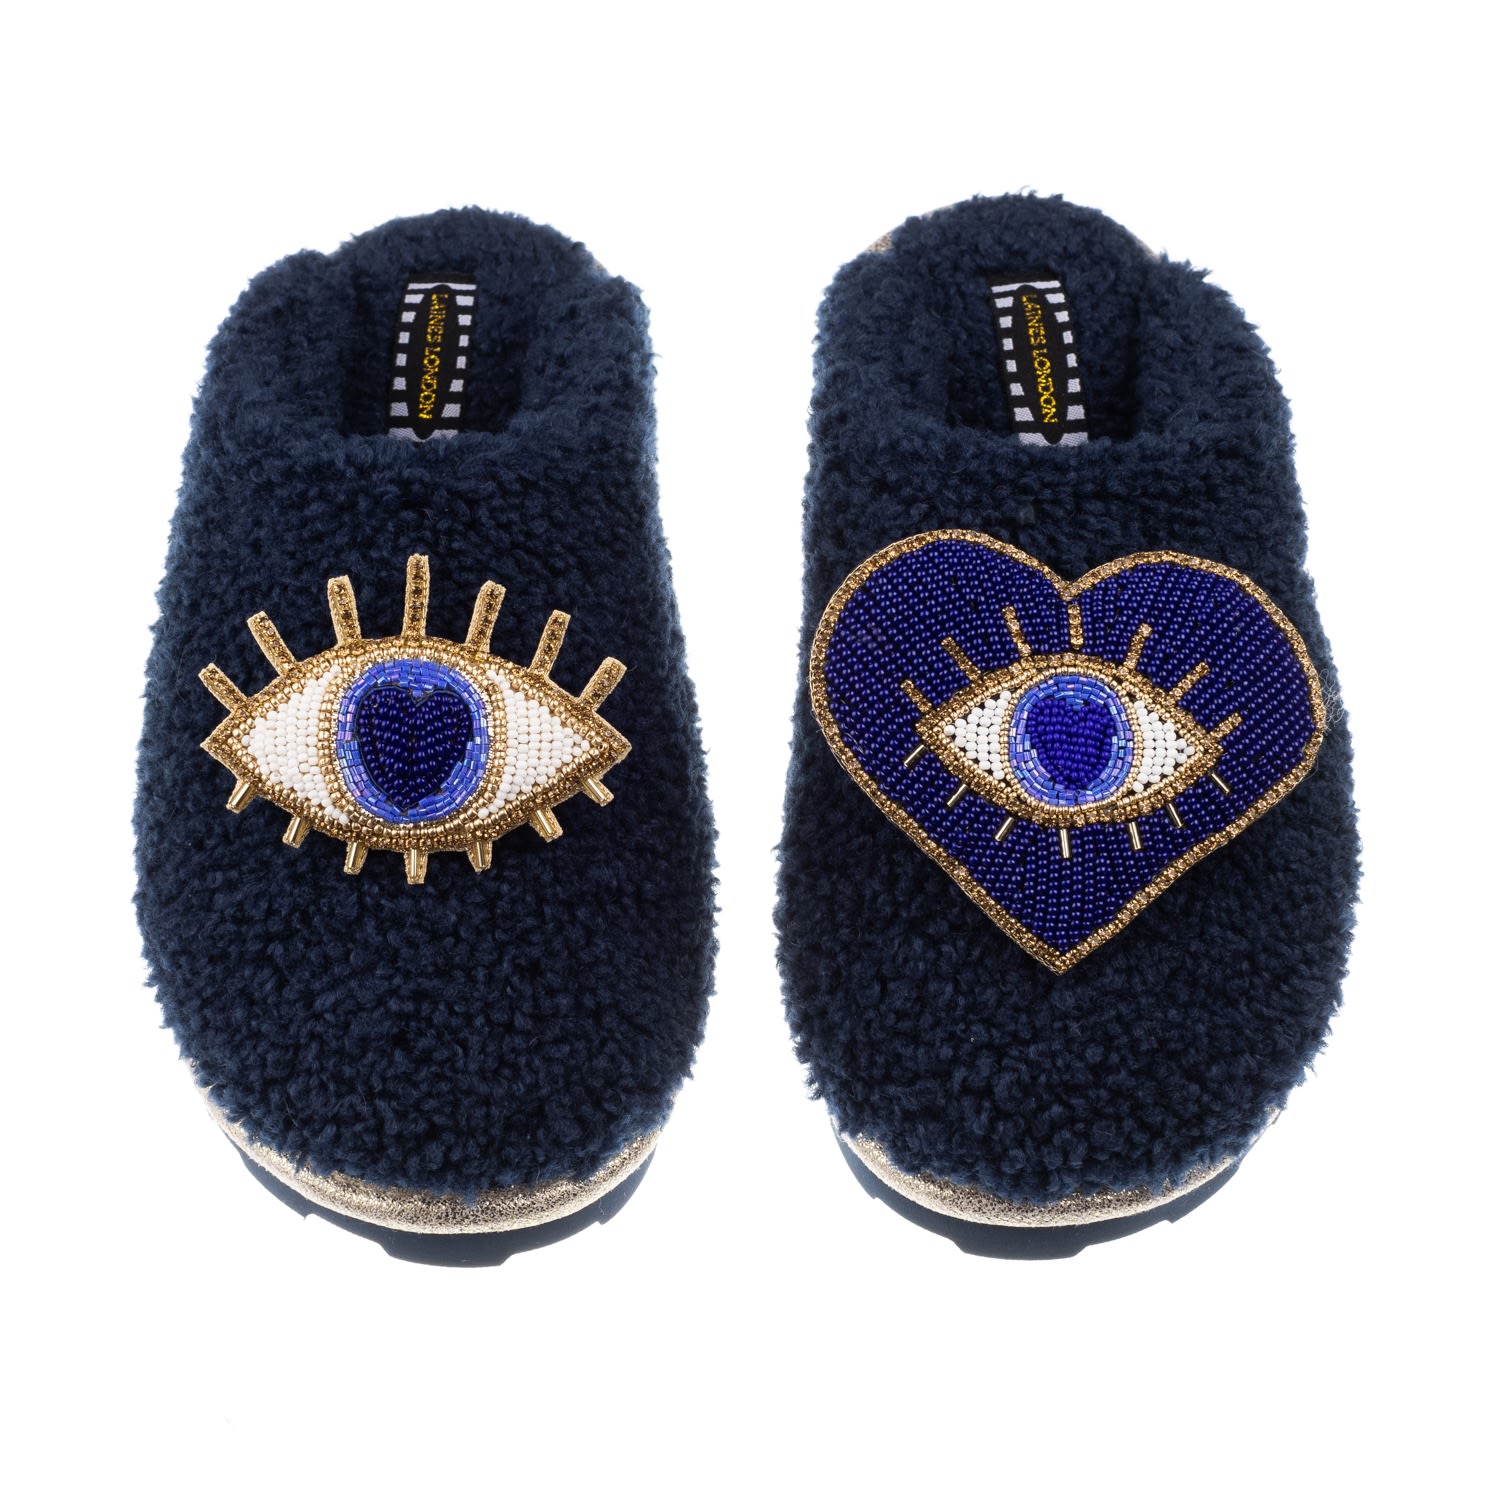 Women’s Teddy Towelling Closed Toe Slippers With Double Blue Eye Brooches - Navy Small Laines London